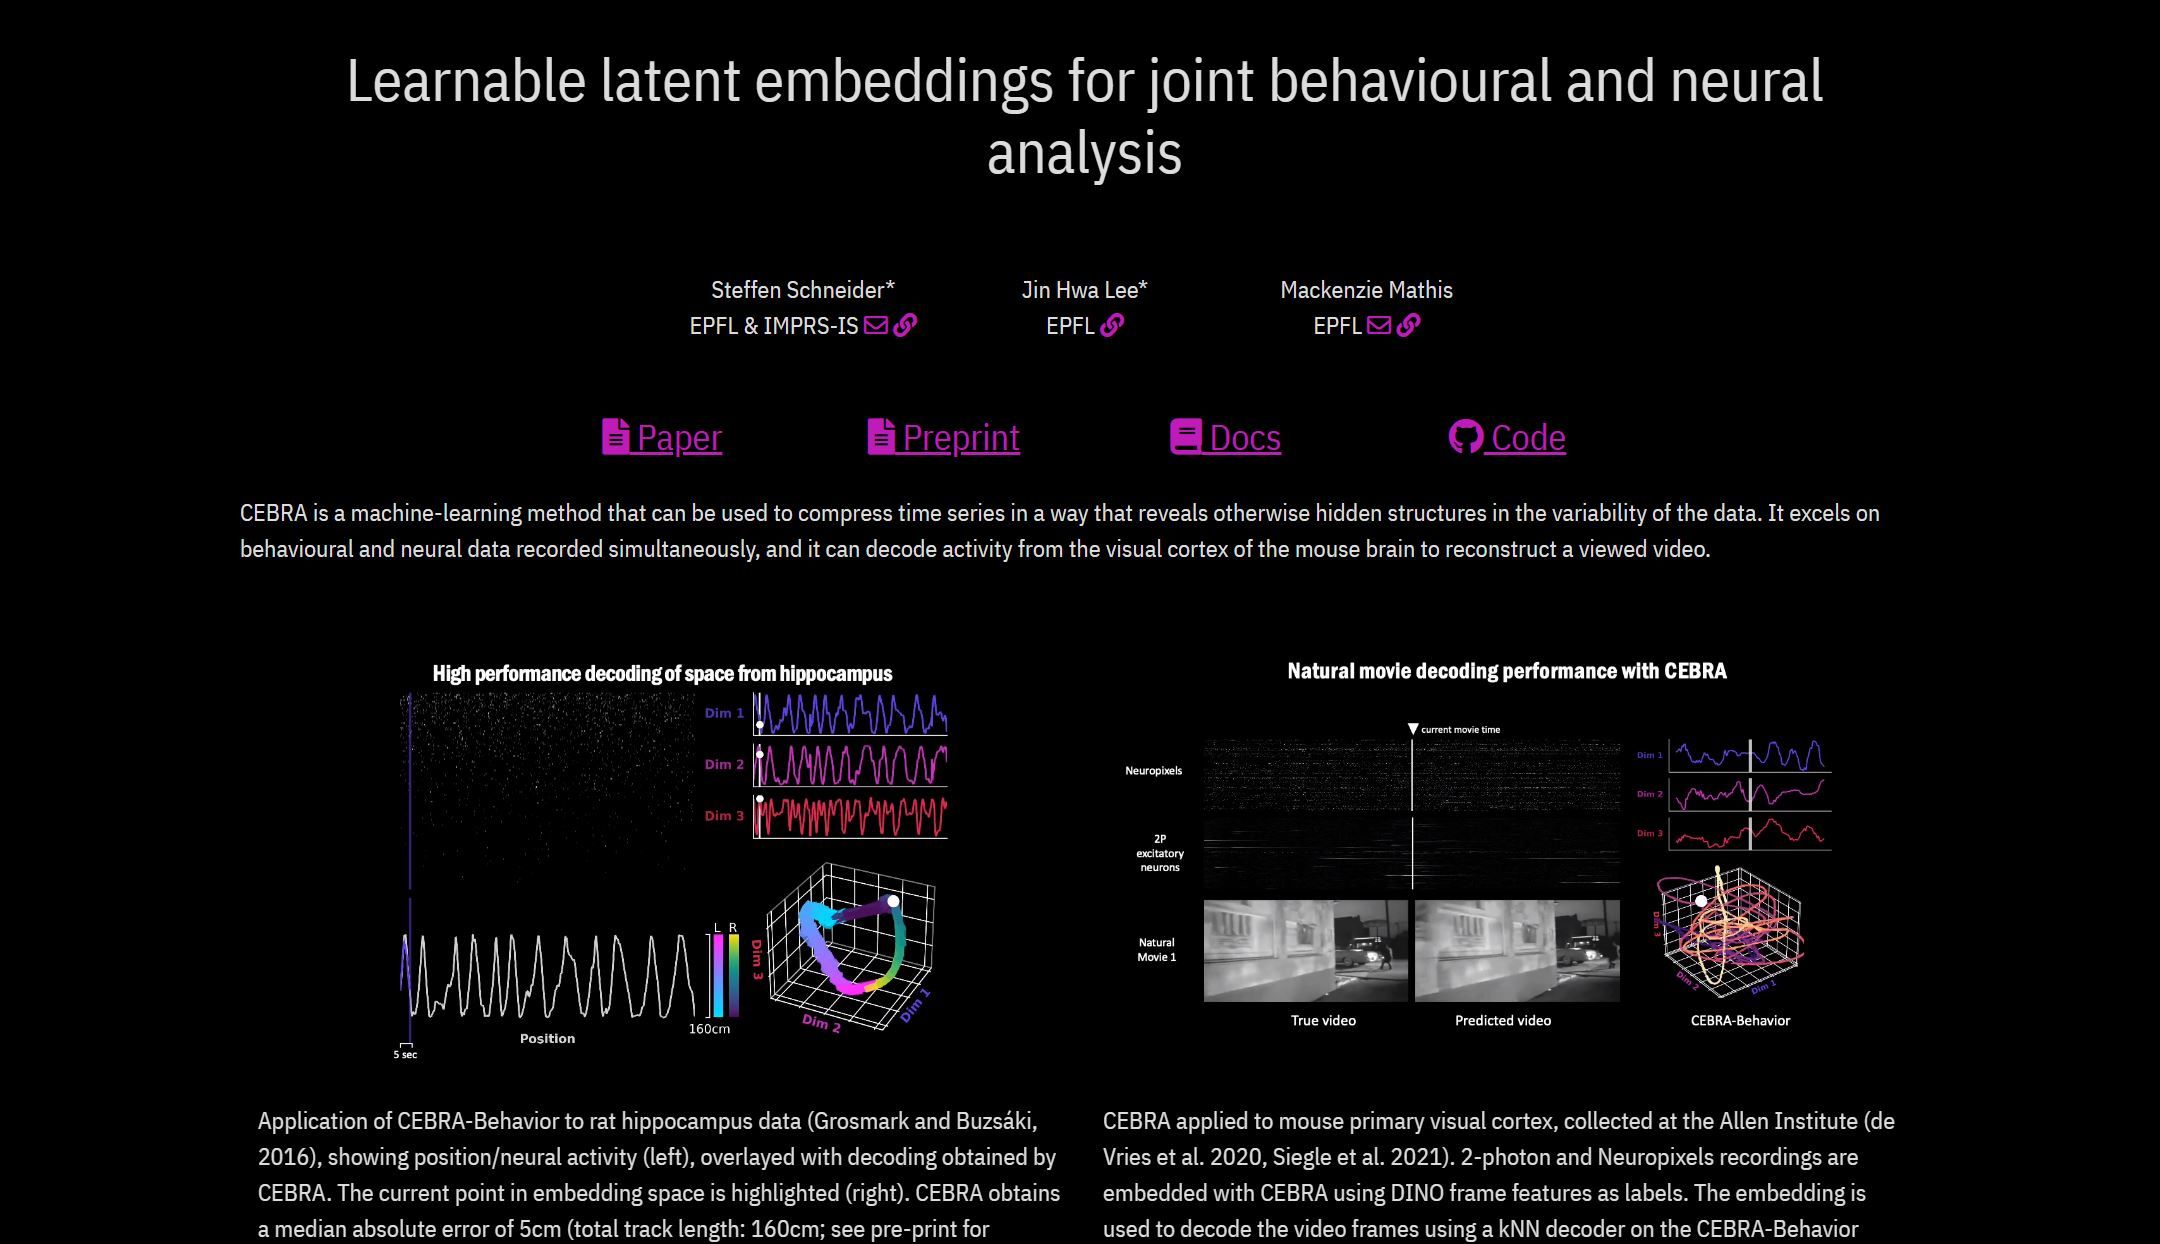  Learnable latent embeddings for joint behavioral